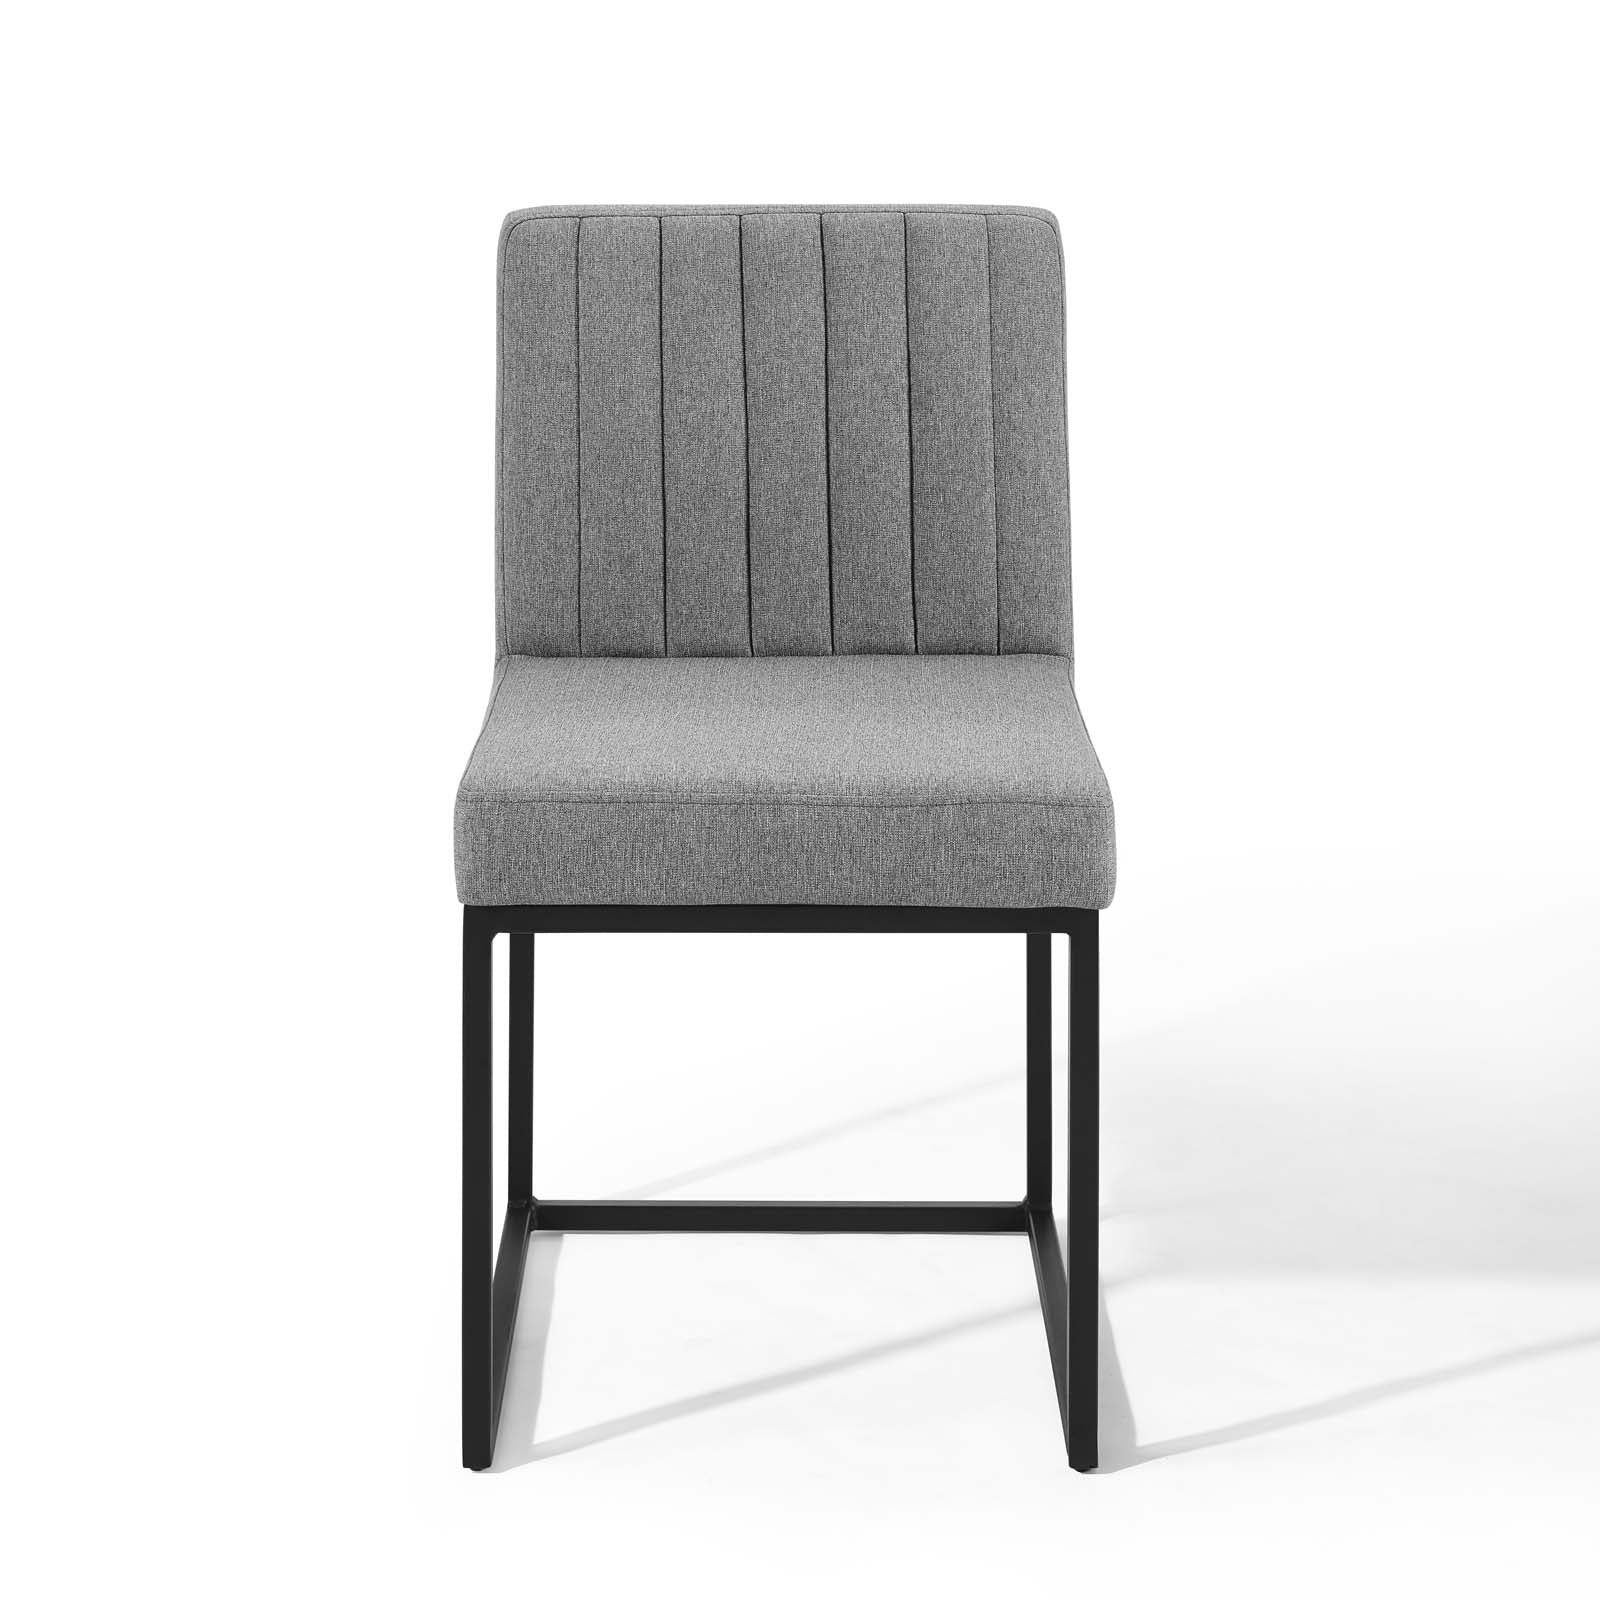 Carriage Channel Tufted Sled Base Upholstered Fabric Dining Chair - East Shore Modern Home Furnishings